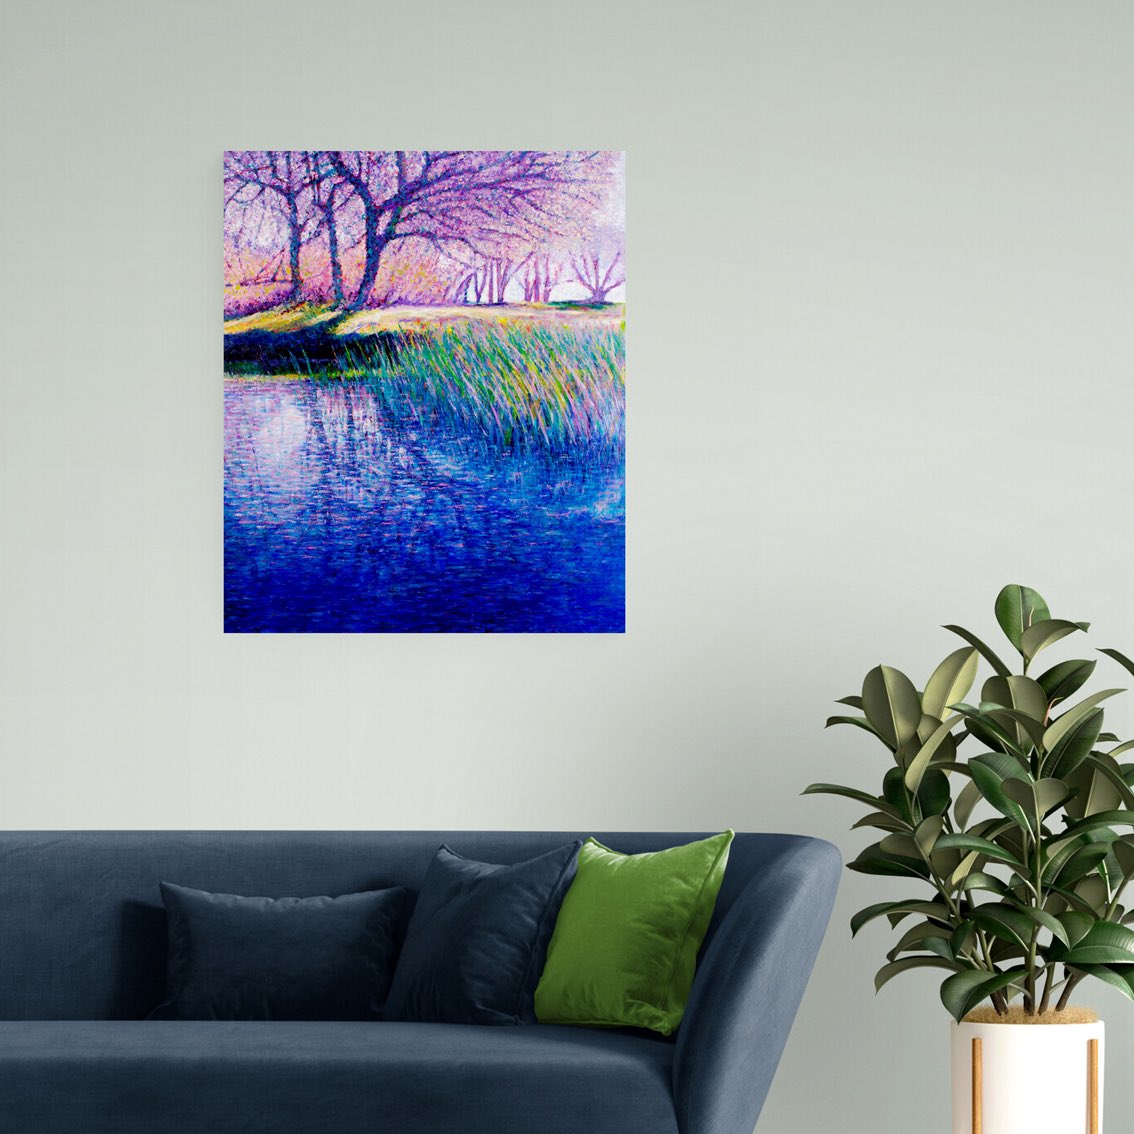 Prints are now available of “Stillness in Reflection” #artprints #fingerpaintingartist